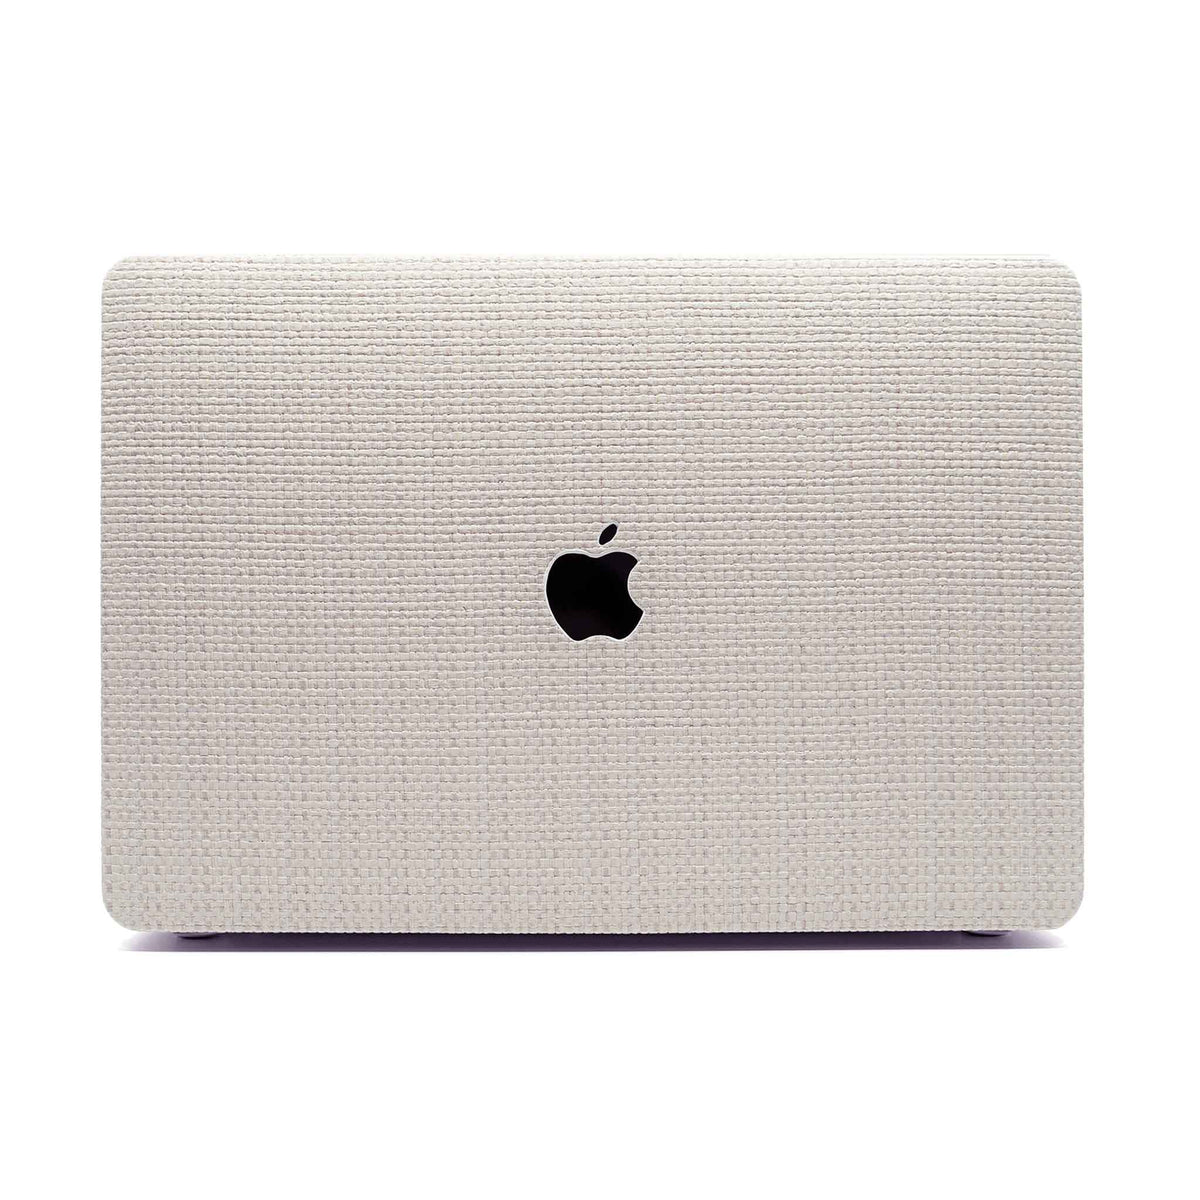 Shop USA-Made MacBook Sleeves and Cases